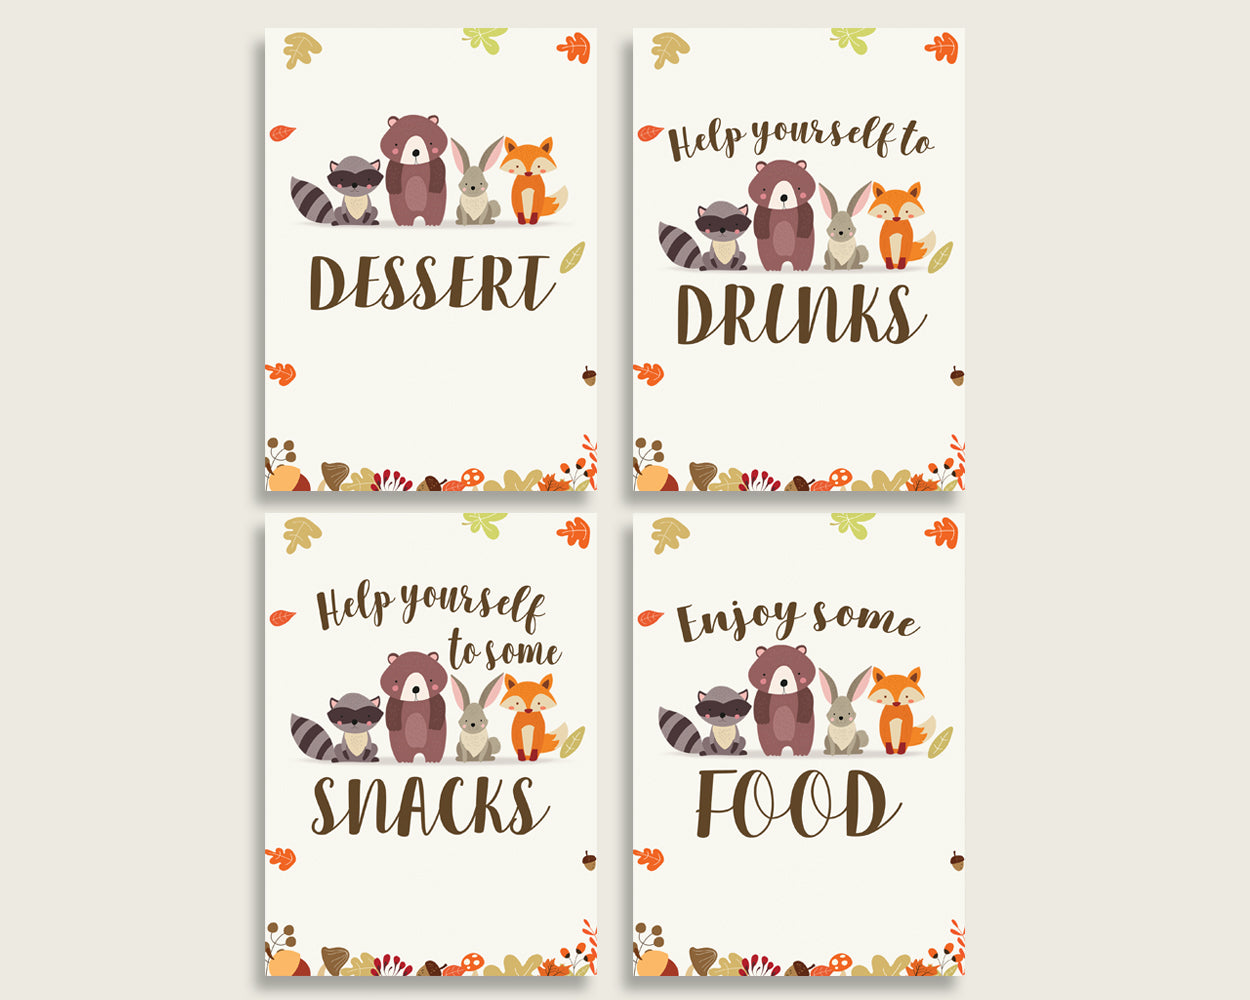 Woodland Baby Shower Gender Neutral Table Signs Printable, Brown Beige Party Table Decor, Favors, Food, Drink, Treat, Guest Book w0001